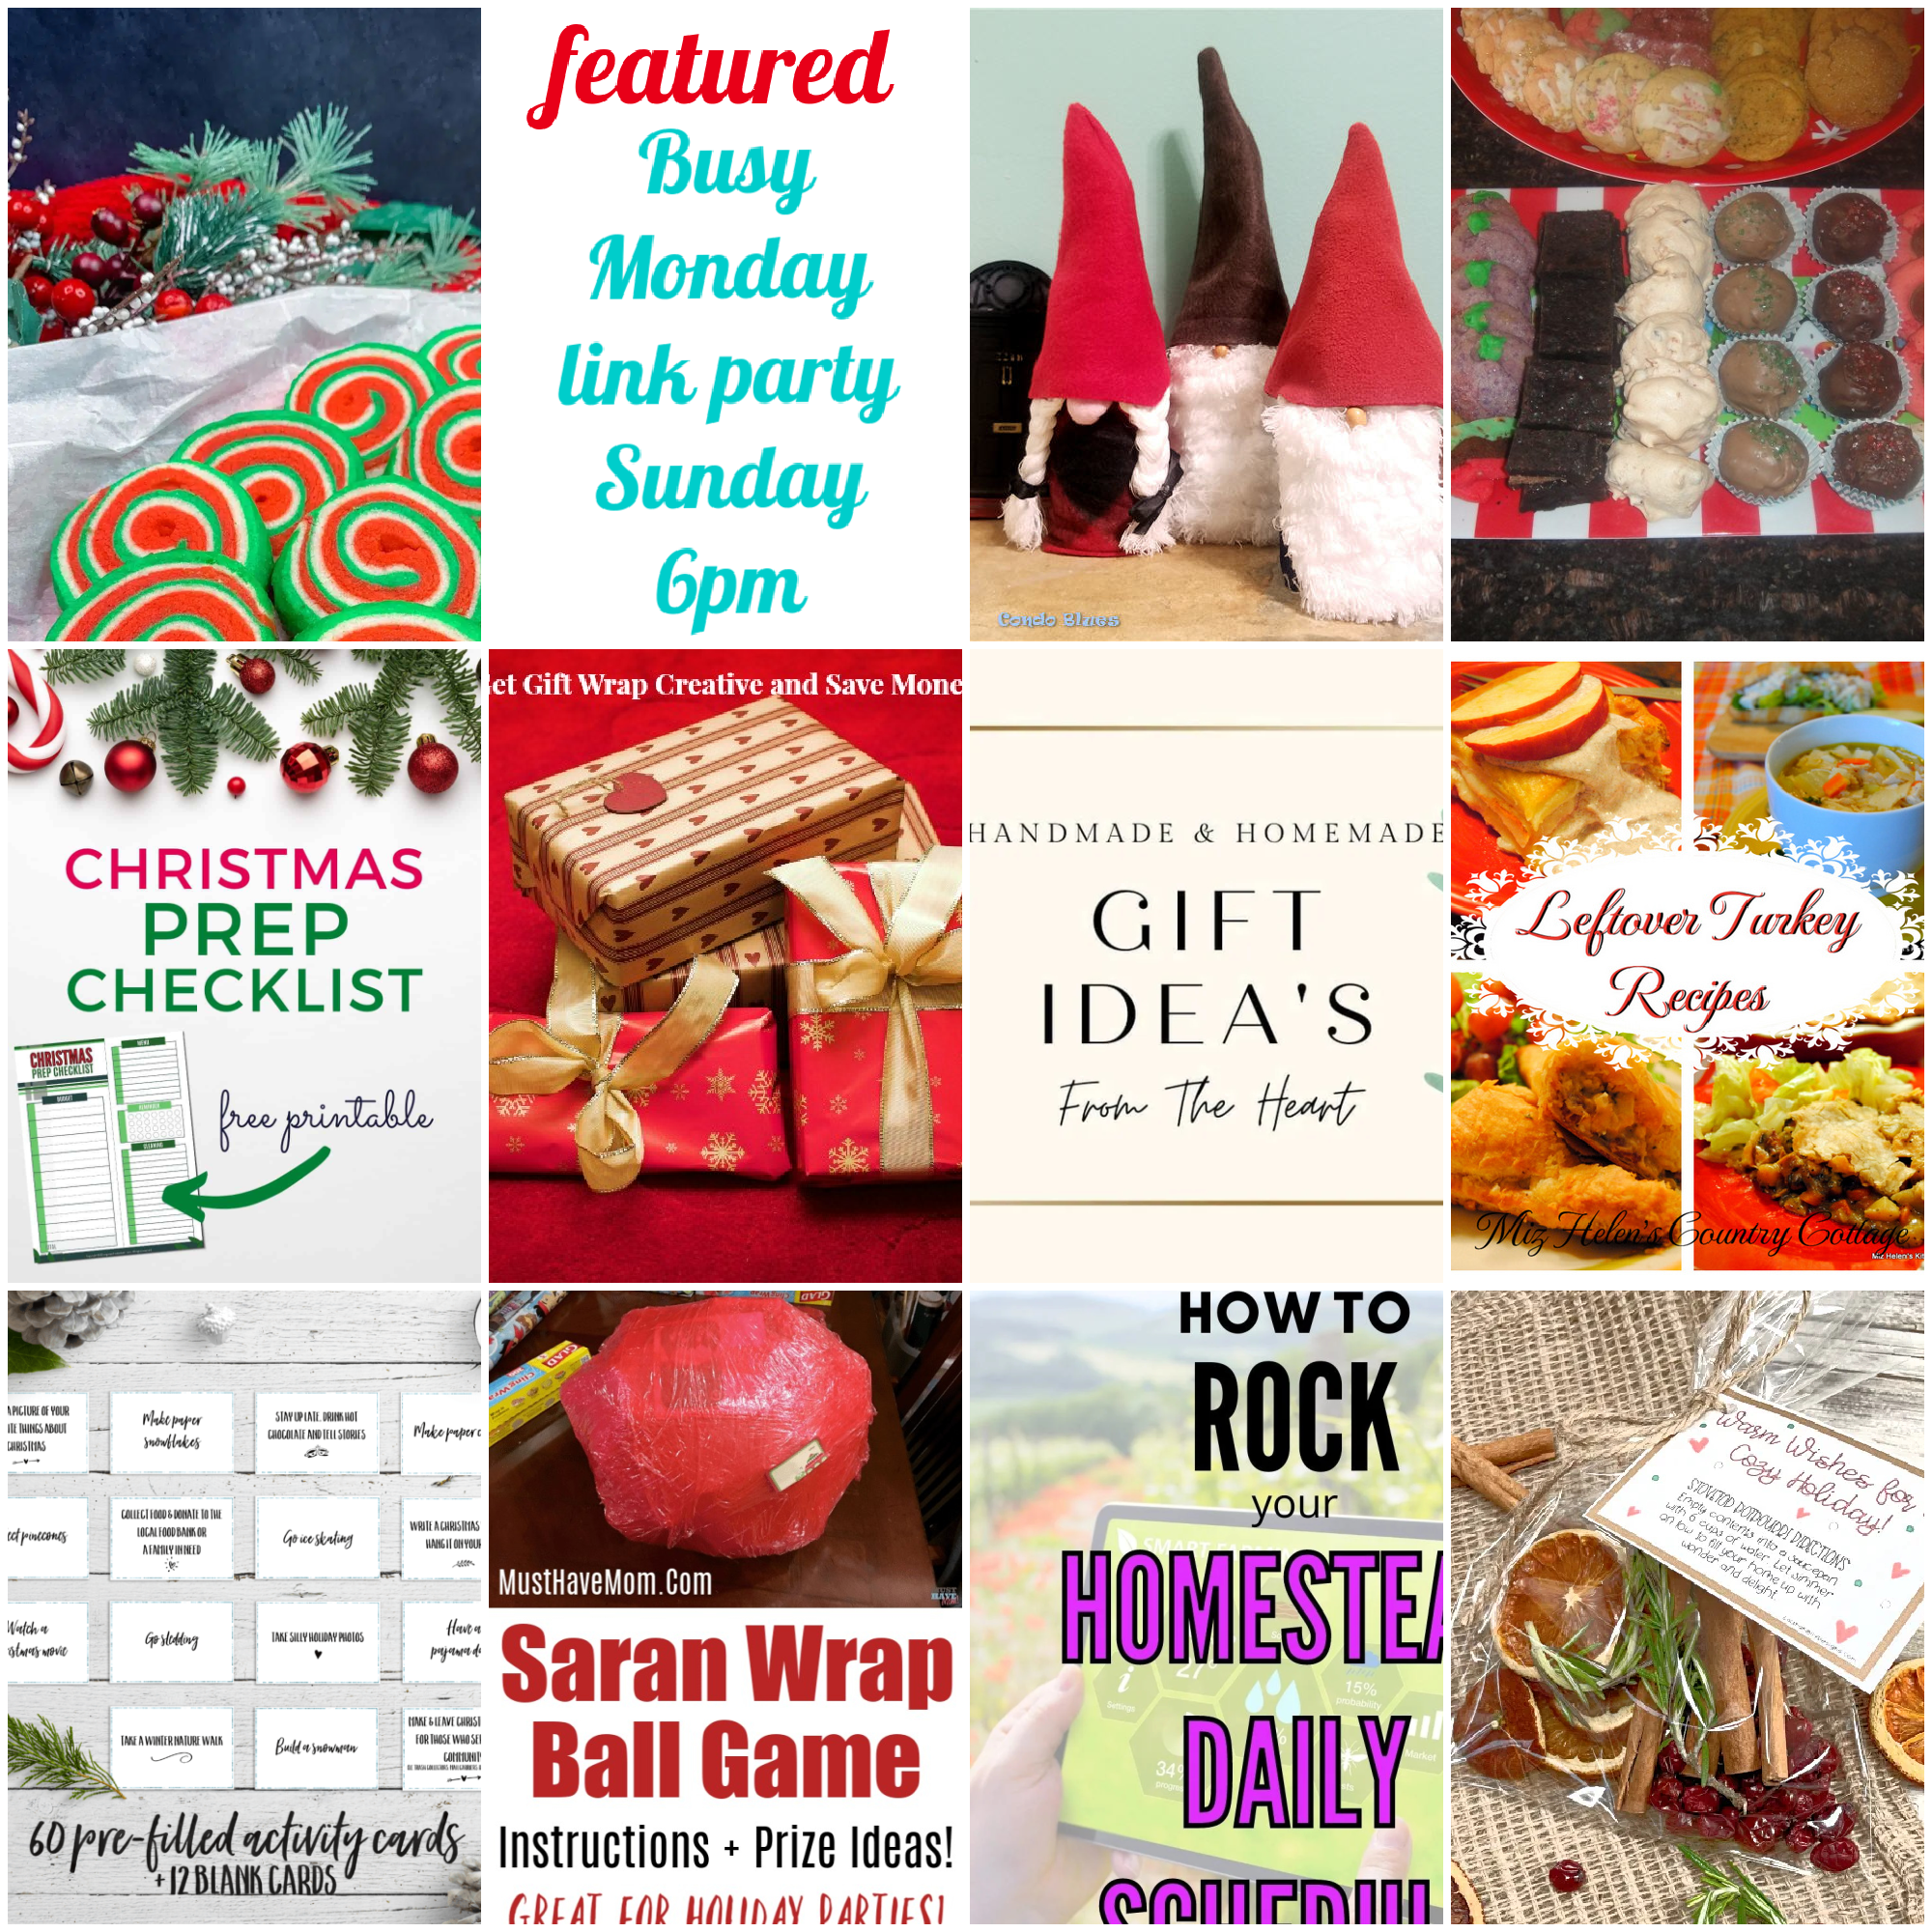 Christmas Stovetop Potpourri Recipe and Free Printable Gift Tag - Laura  Kelly's Inklings